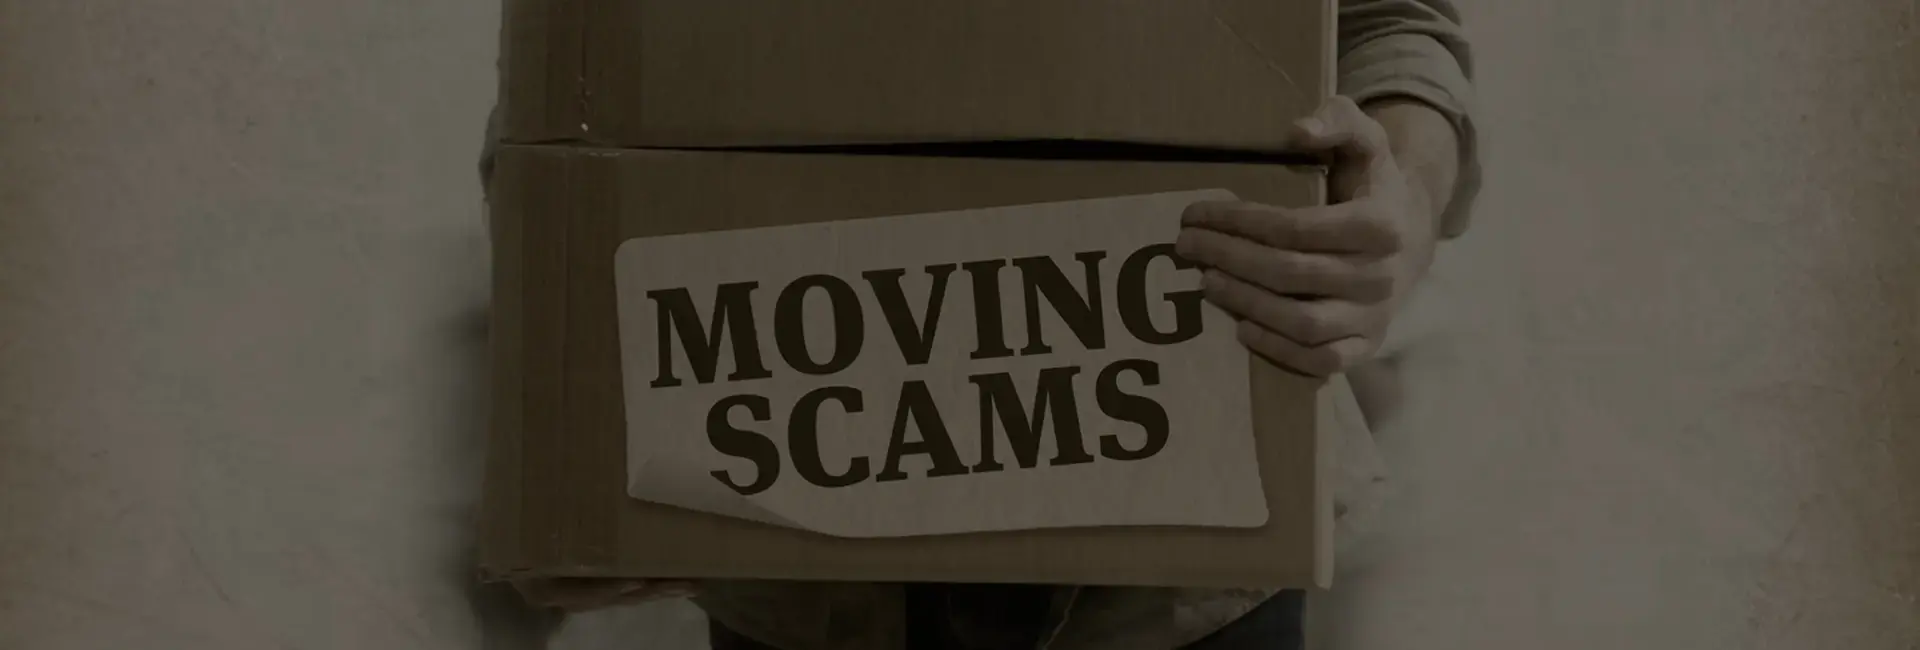 U.S. Officials Announce Nationwide Crackdown on Moving Company Scams - ISS Relocations